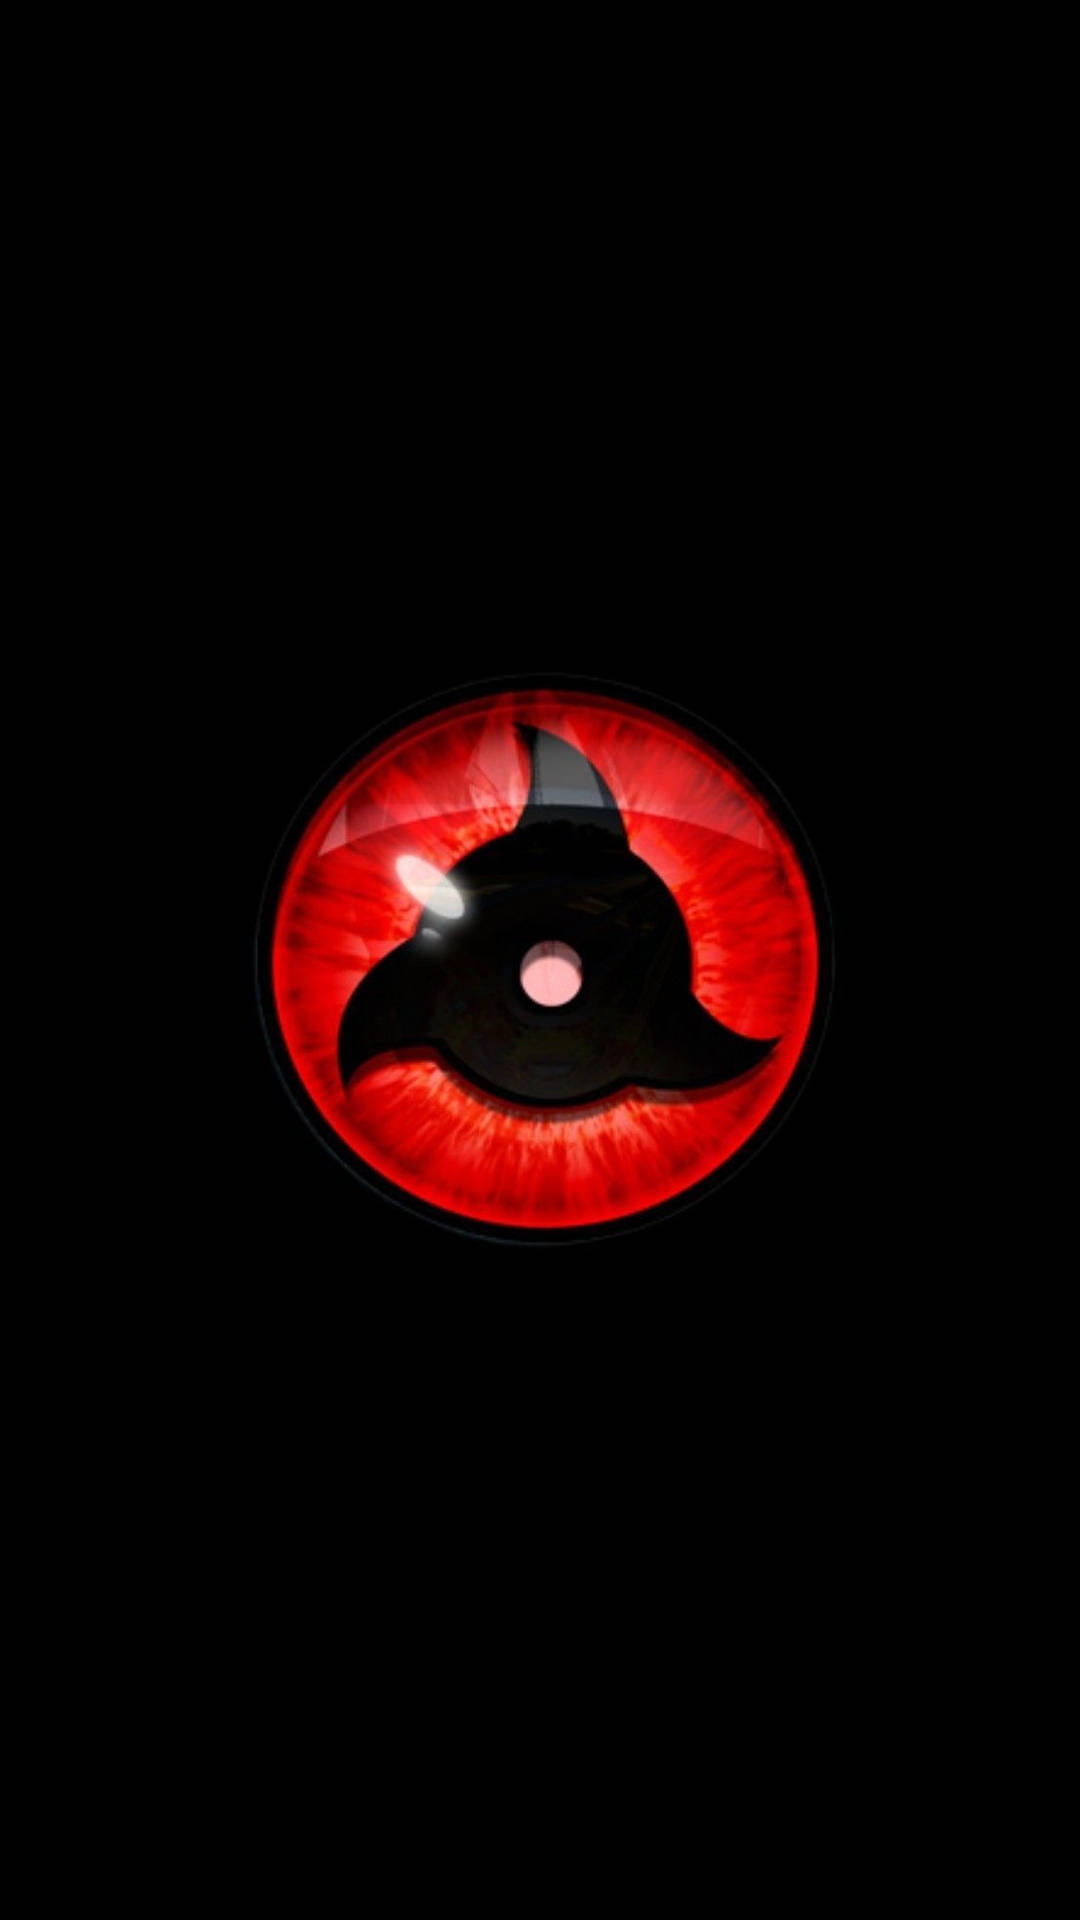 Sharingan Eye In Live Action Background